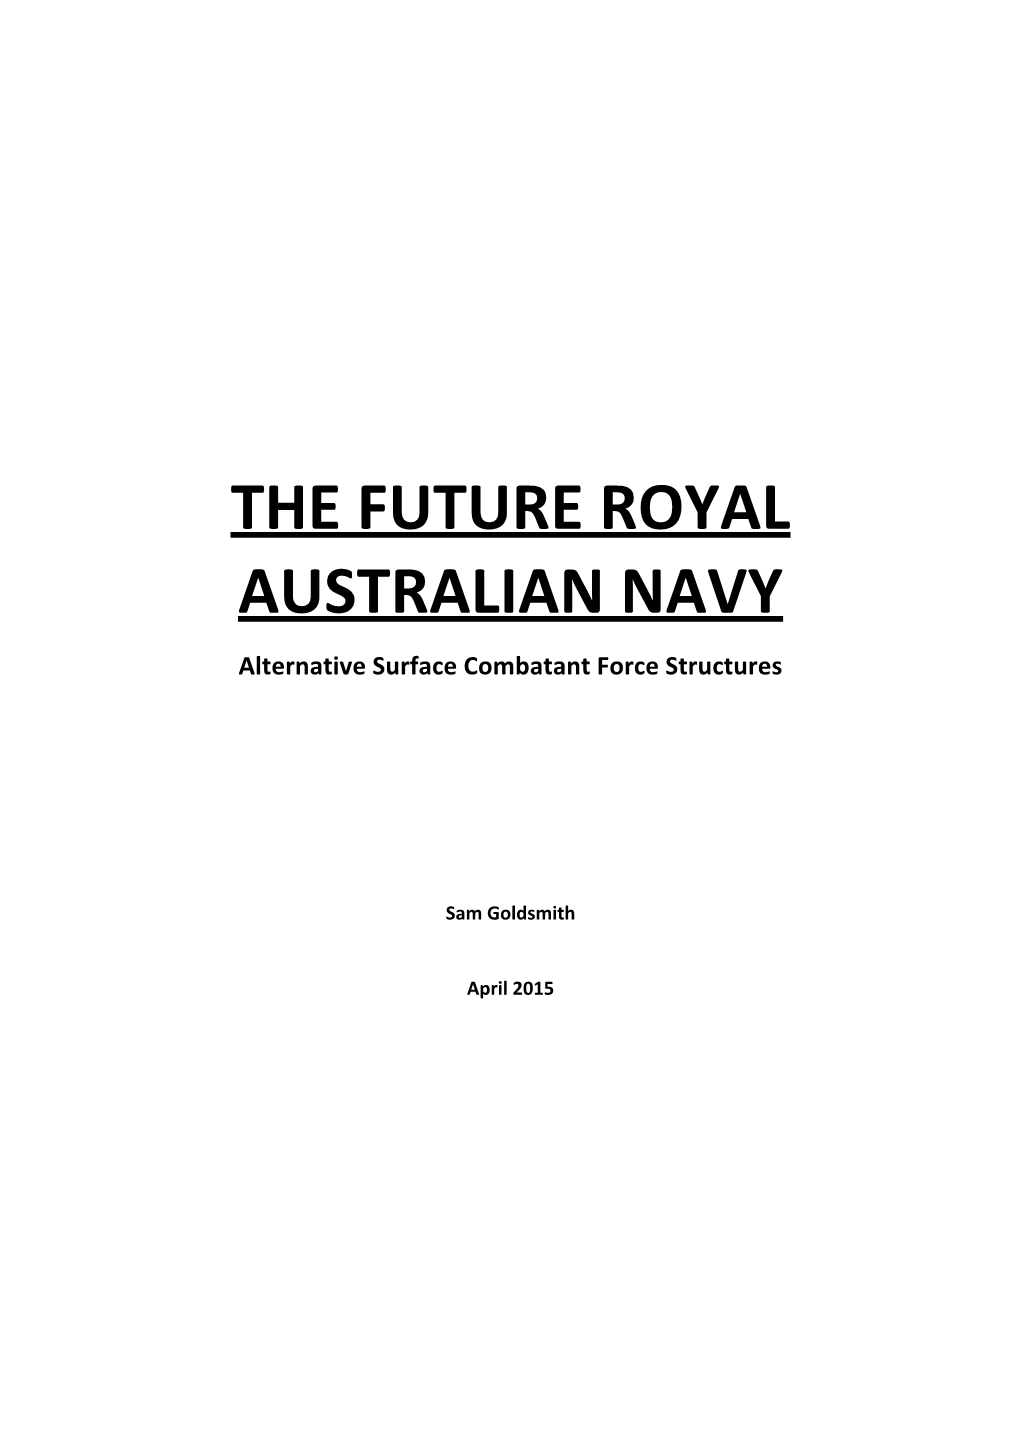 THE FUTURE ROYAL AUSTRALIAN NAVY Alternative Surface Combatant Force Structures